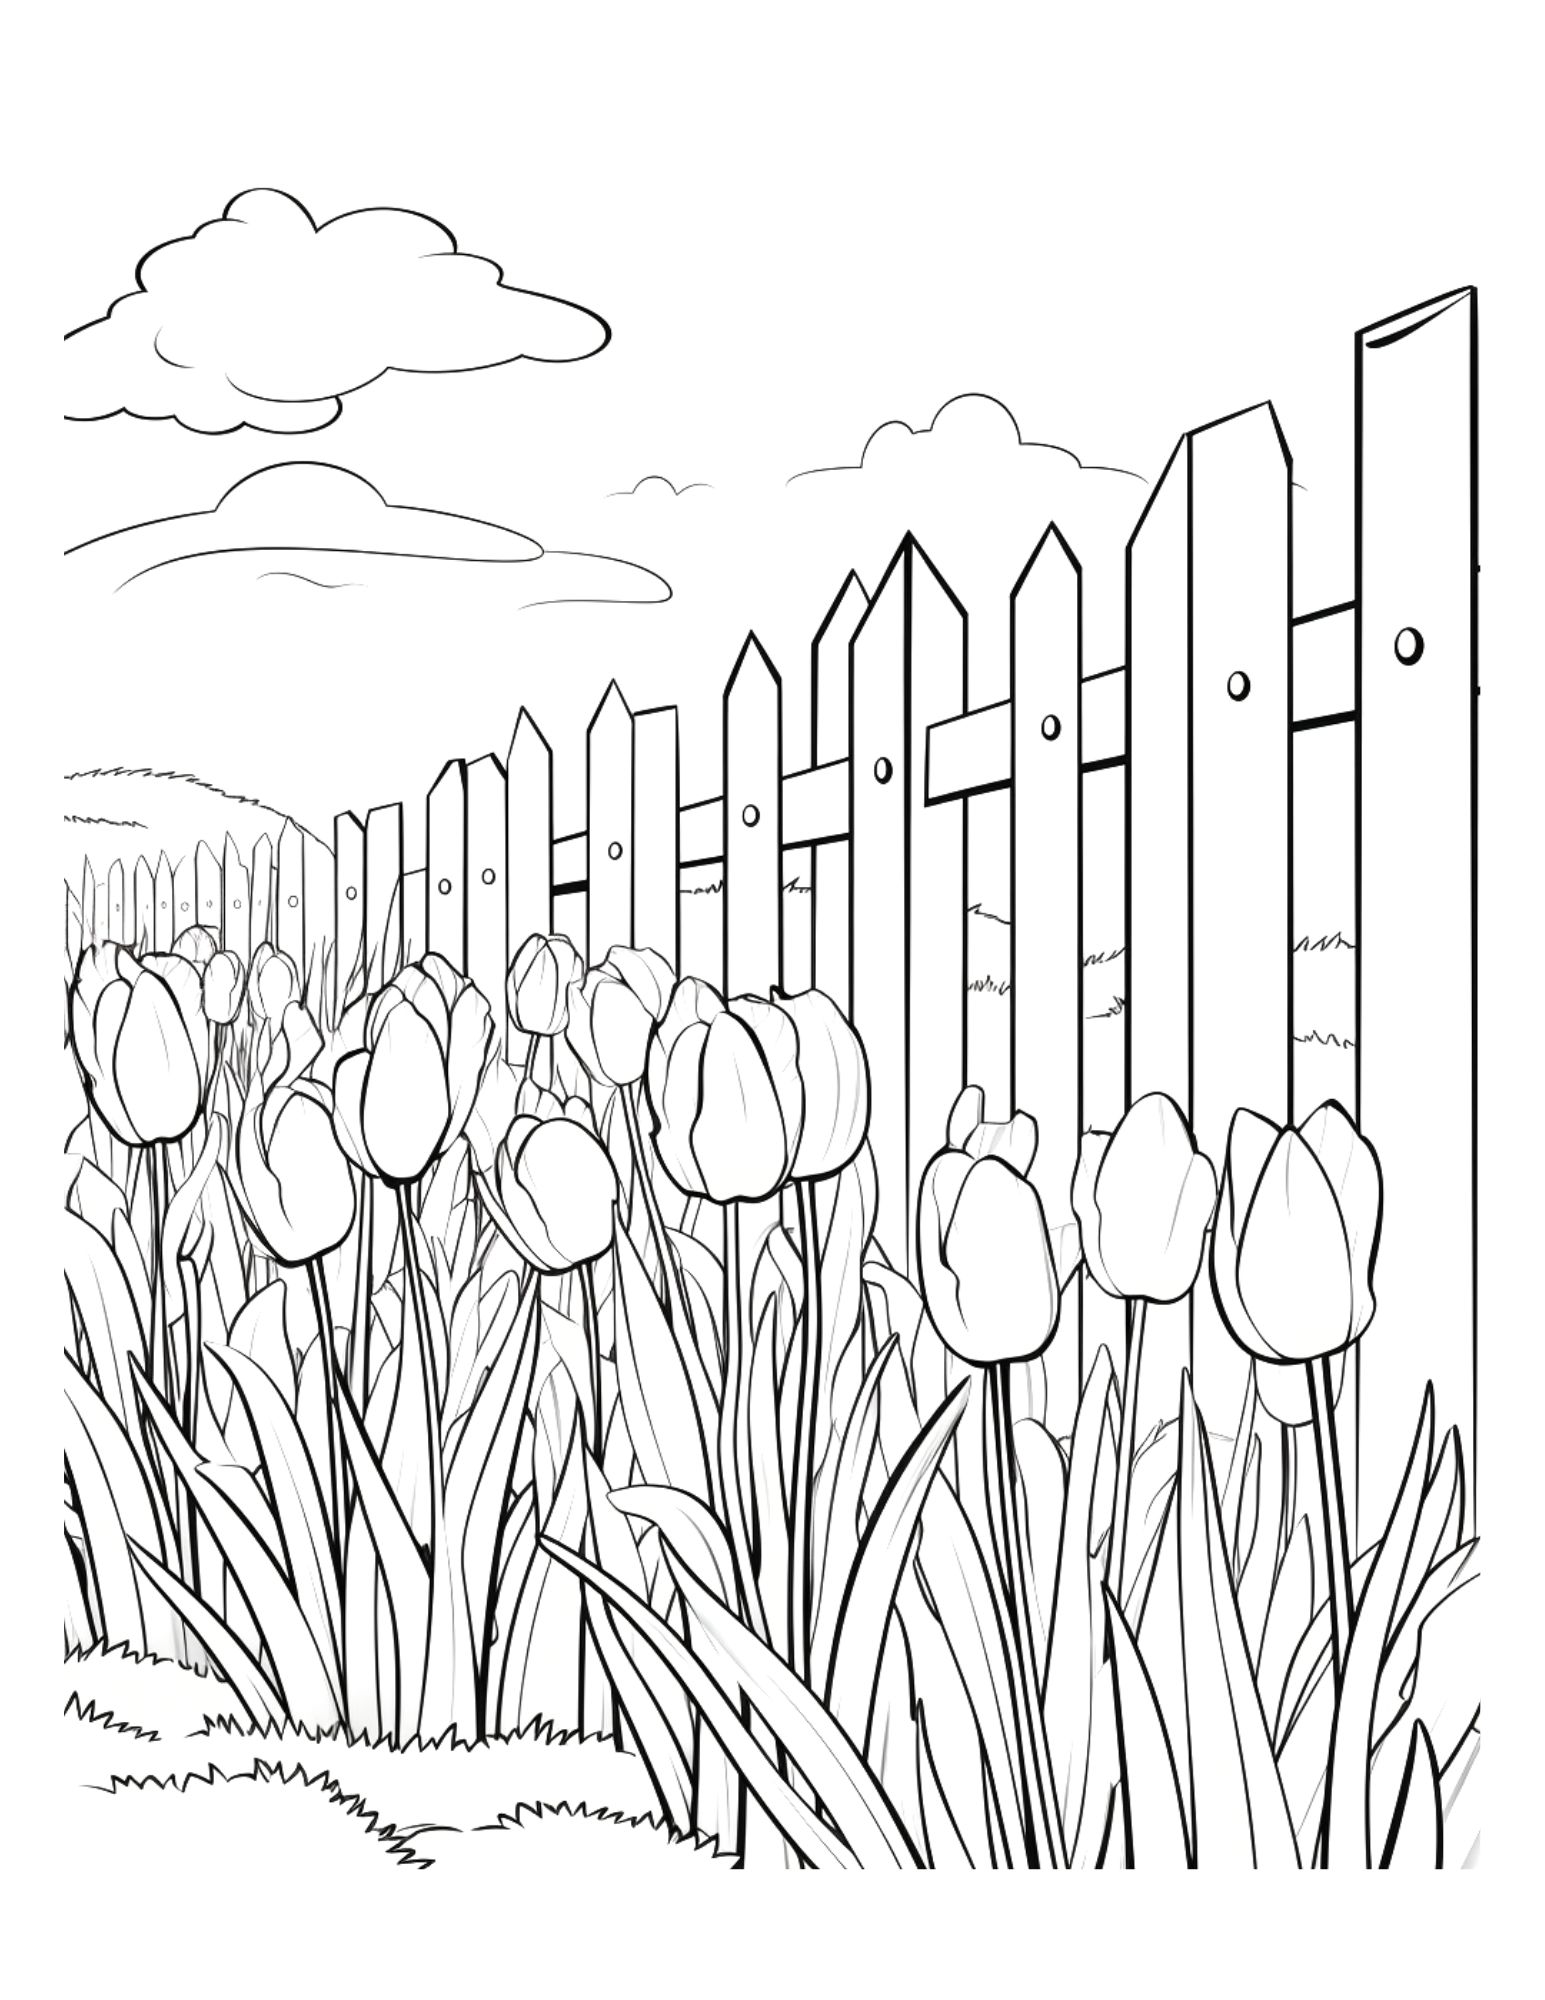 spring coloring page, PDF, instant download, kids